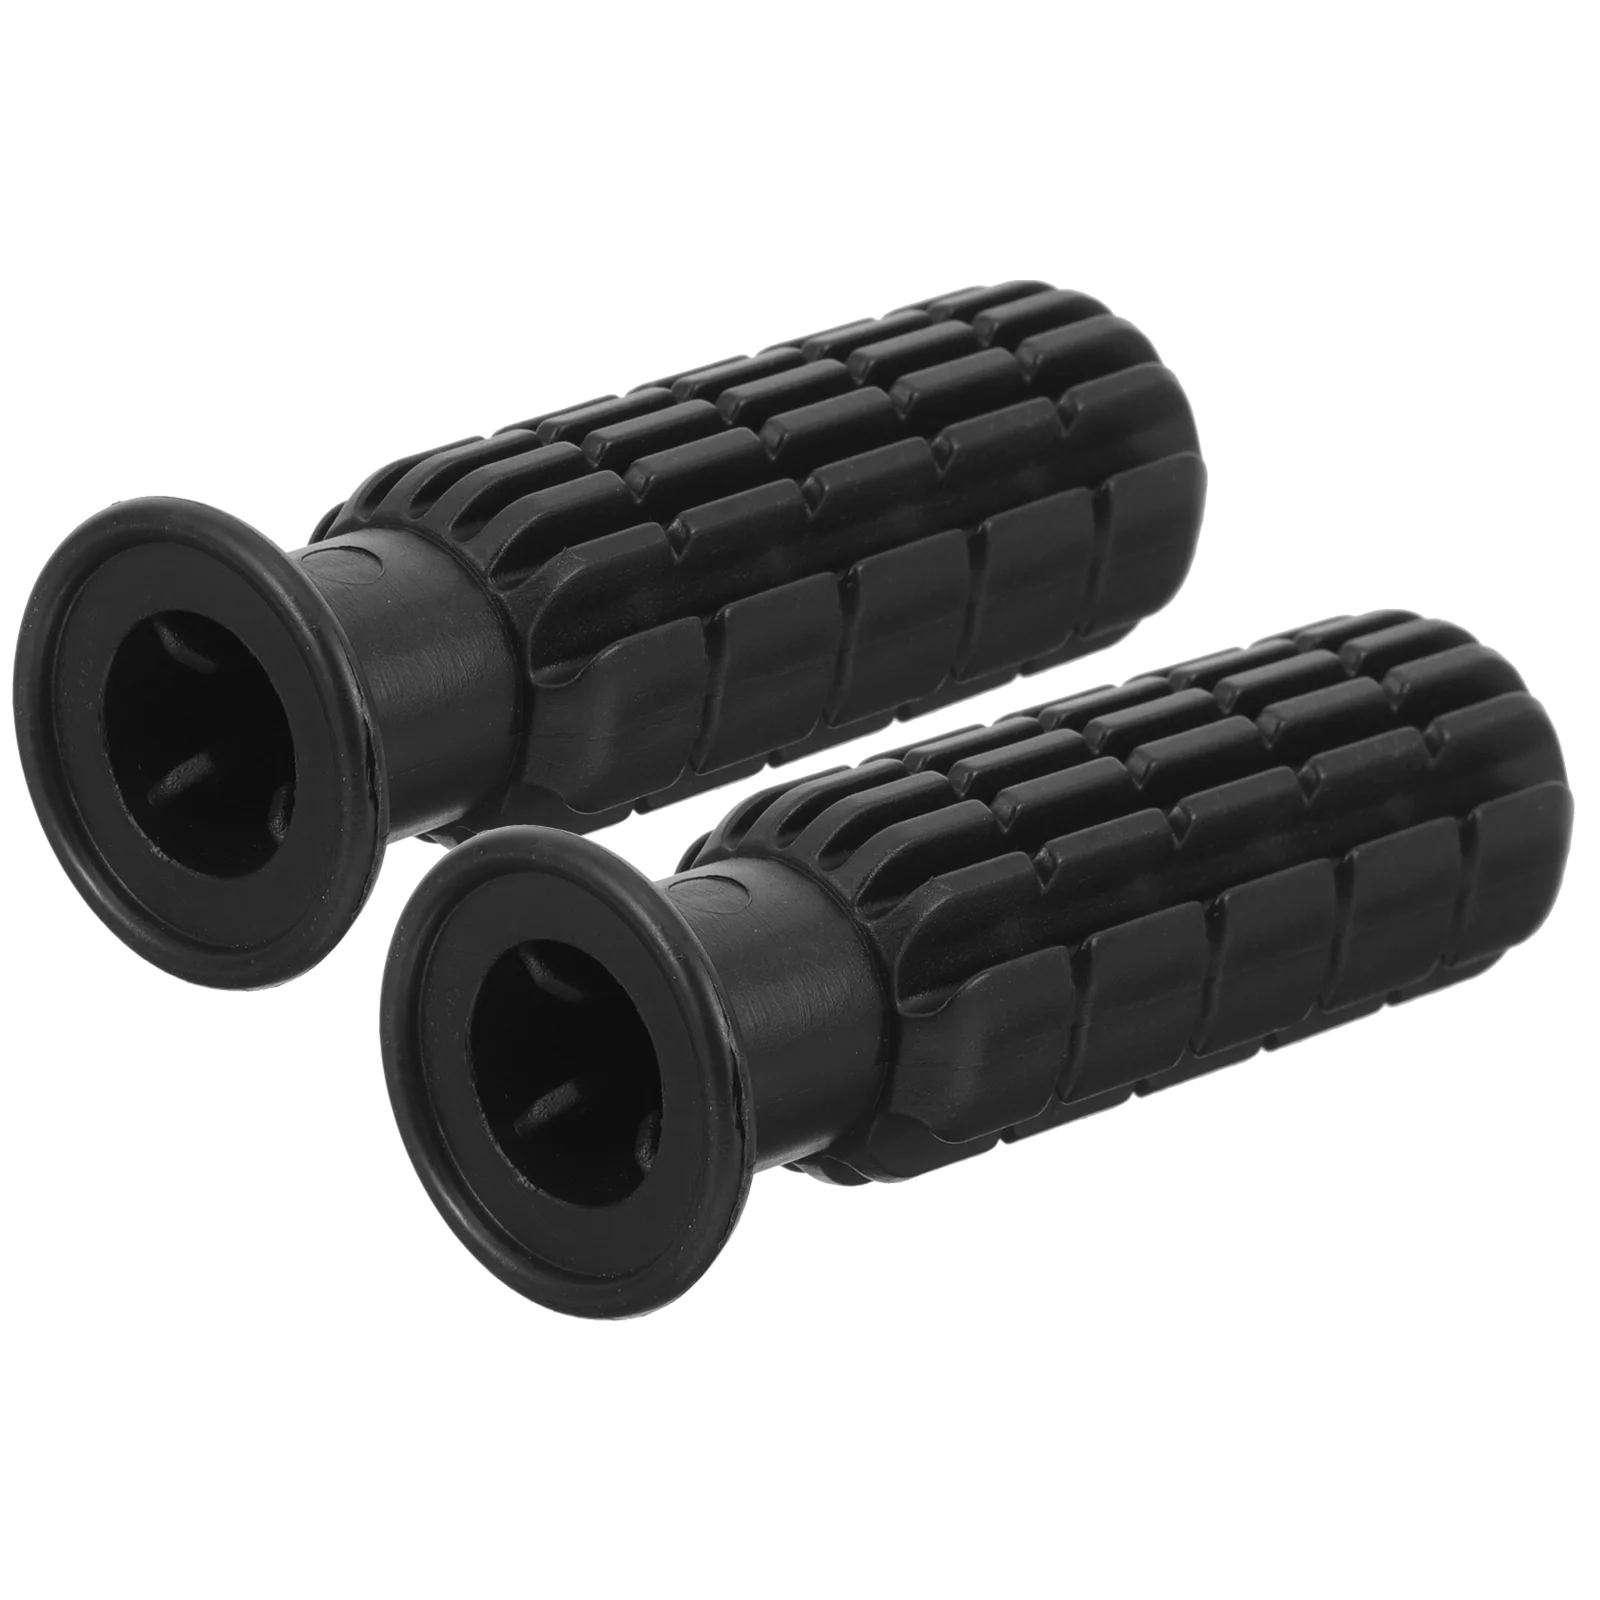 Replaceable Soccer Ballsss Soccer Anti-skid Handles Pvc Material Grip Replacement